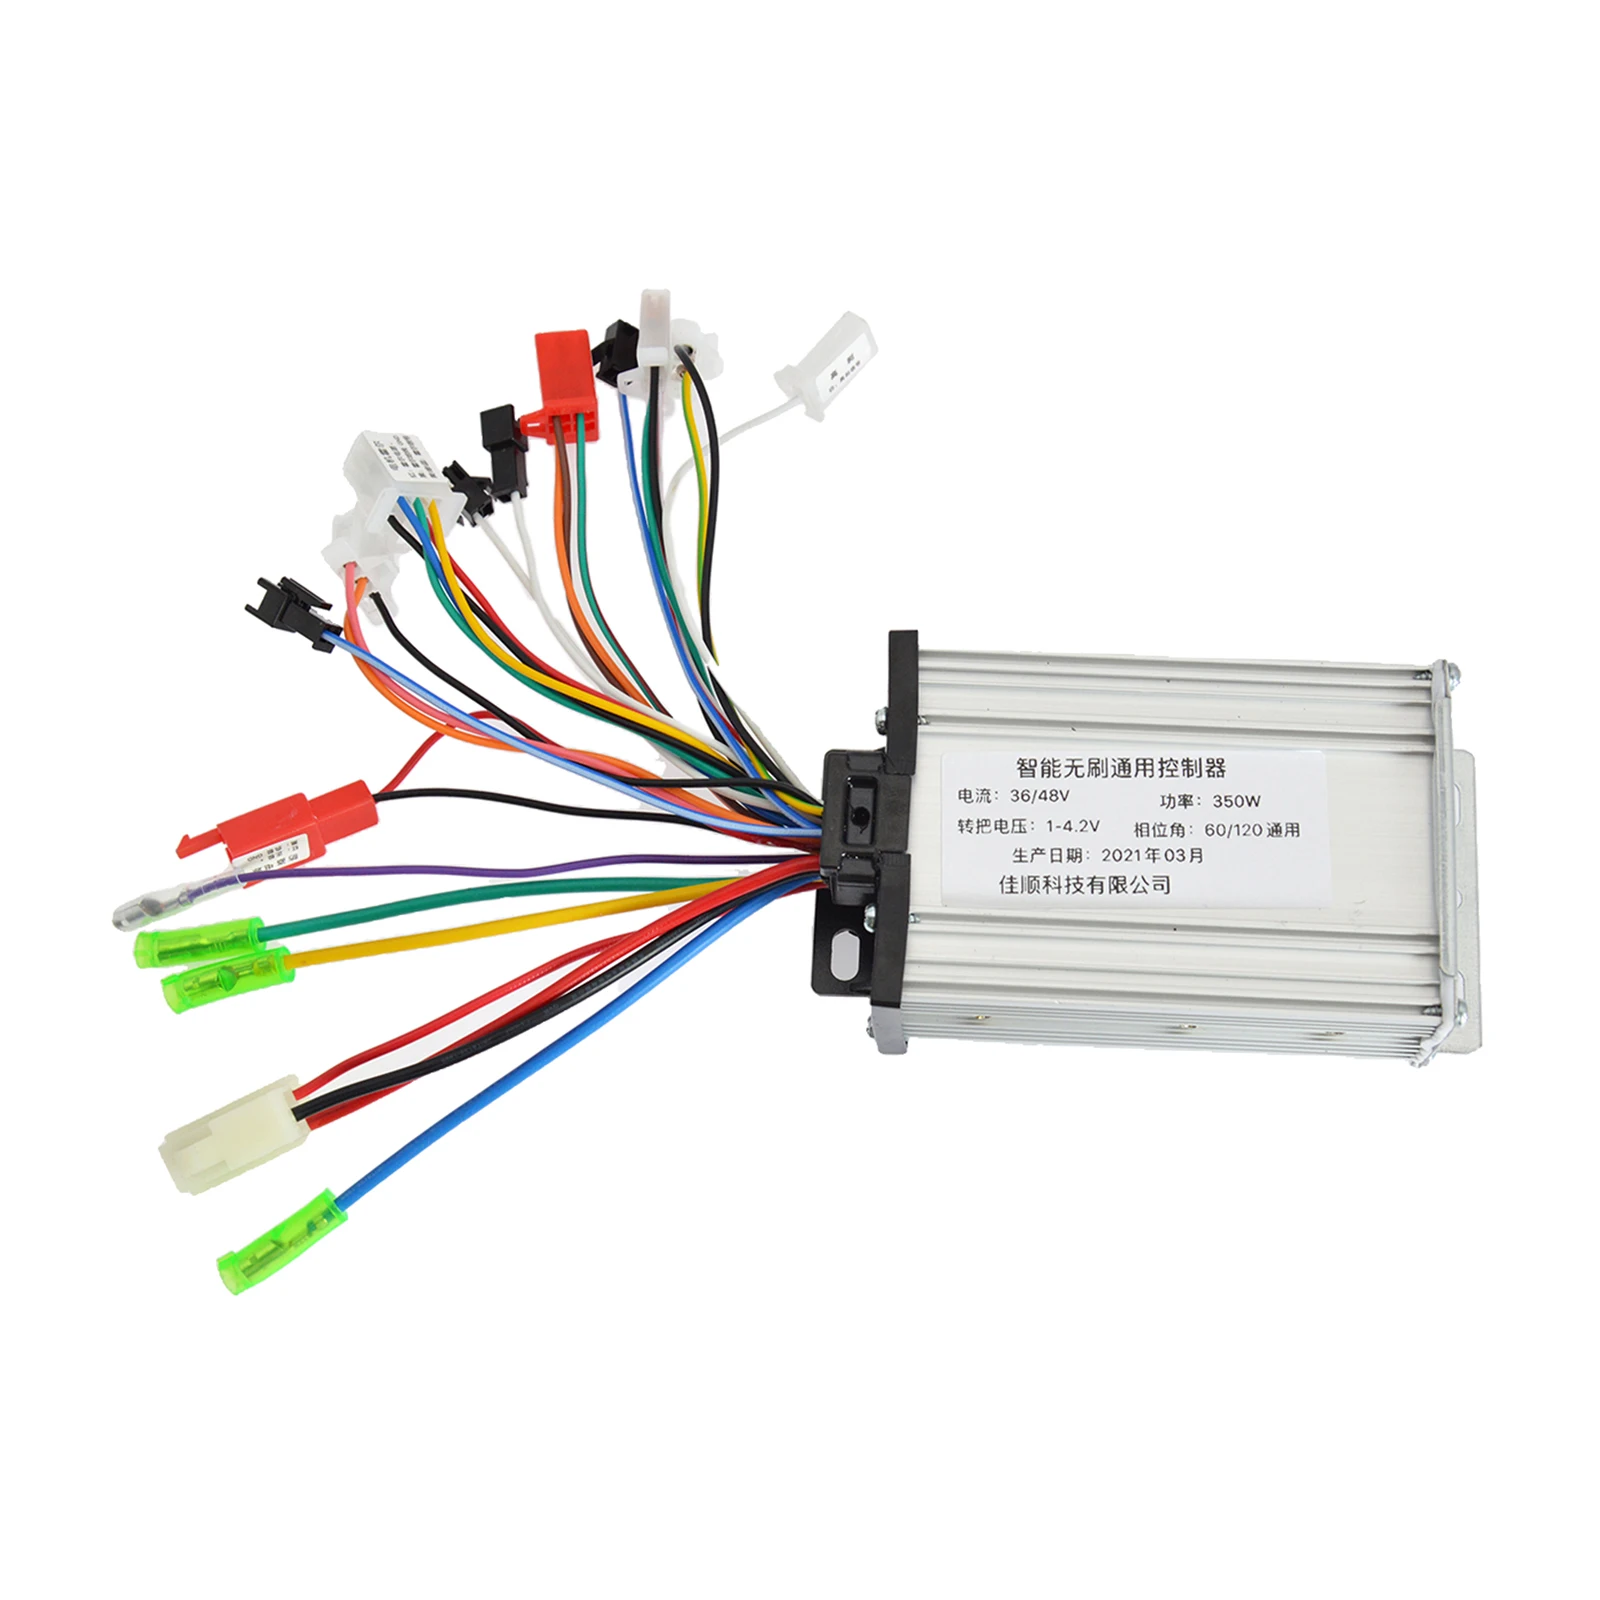 Deluxe Electric Bicycle Controller Brushless DC Motor Control Box Speed